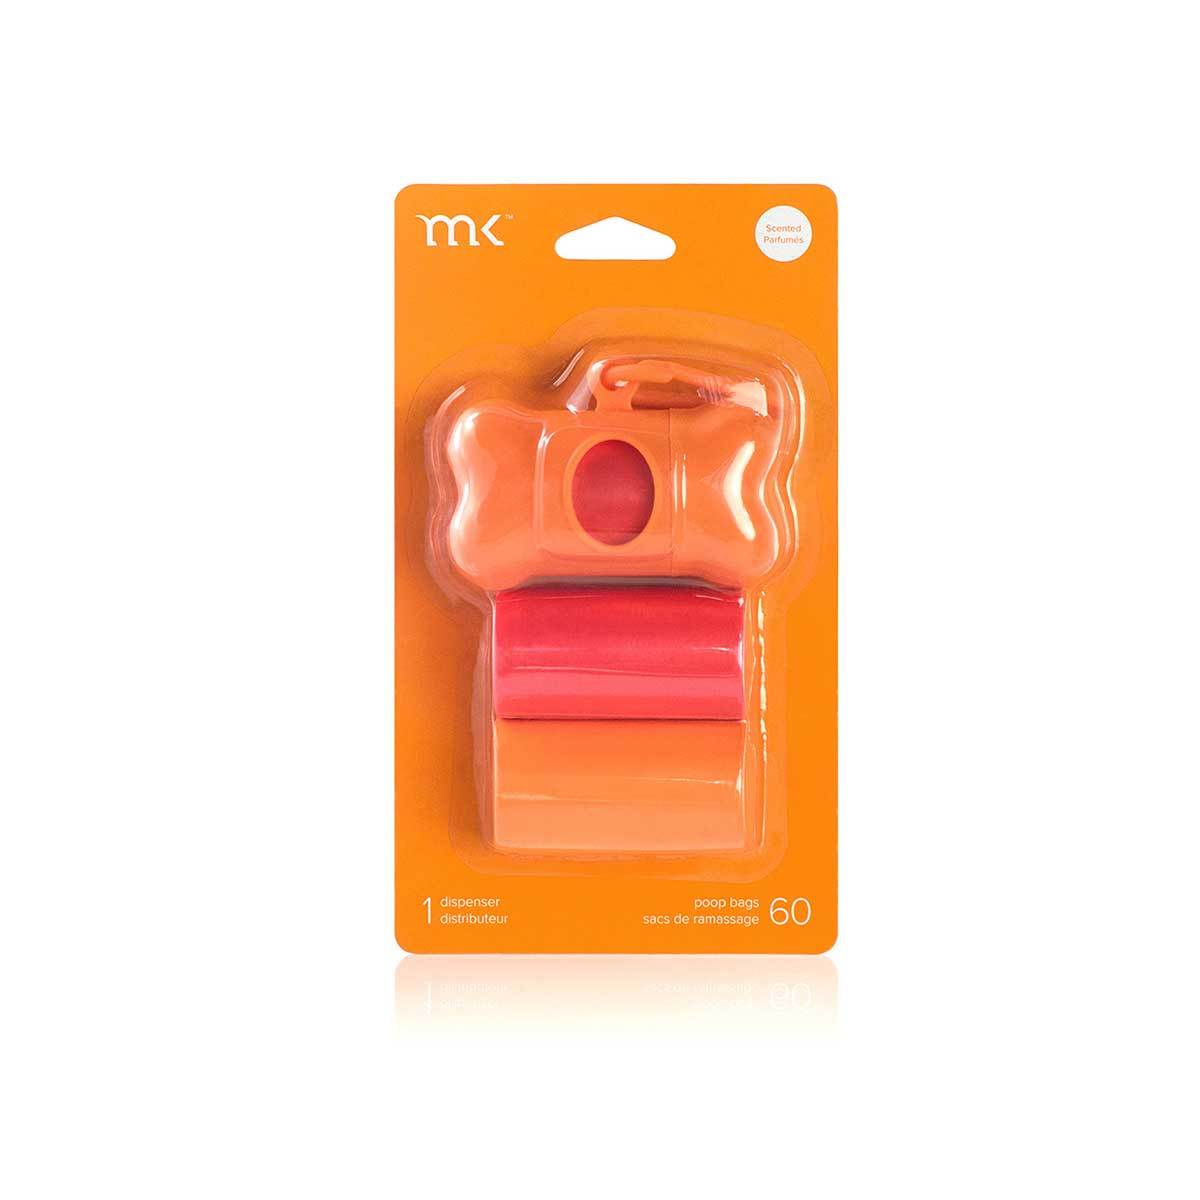 Modern Kanine Dispenser and Waste Bags - Orange & Coral | Pawlicious & Company